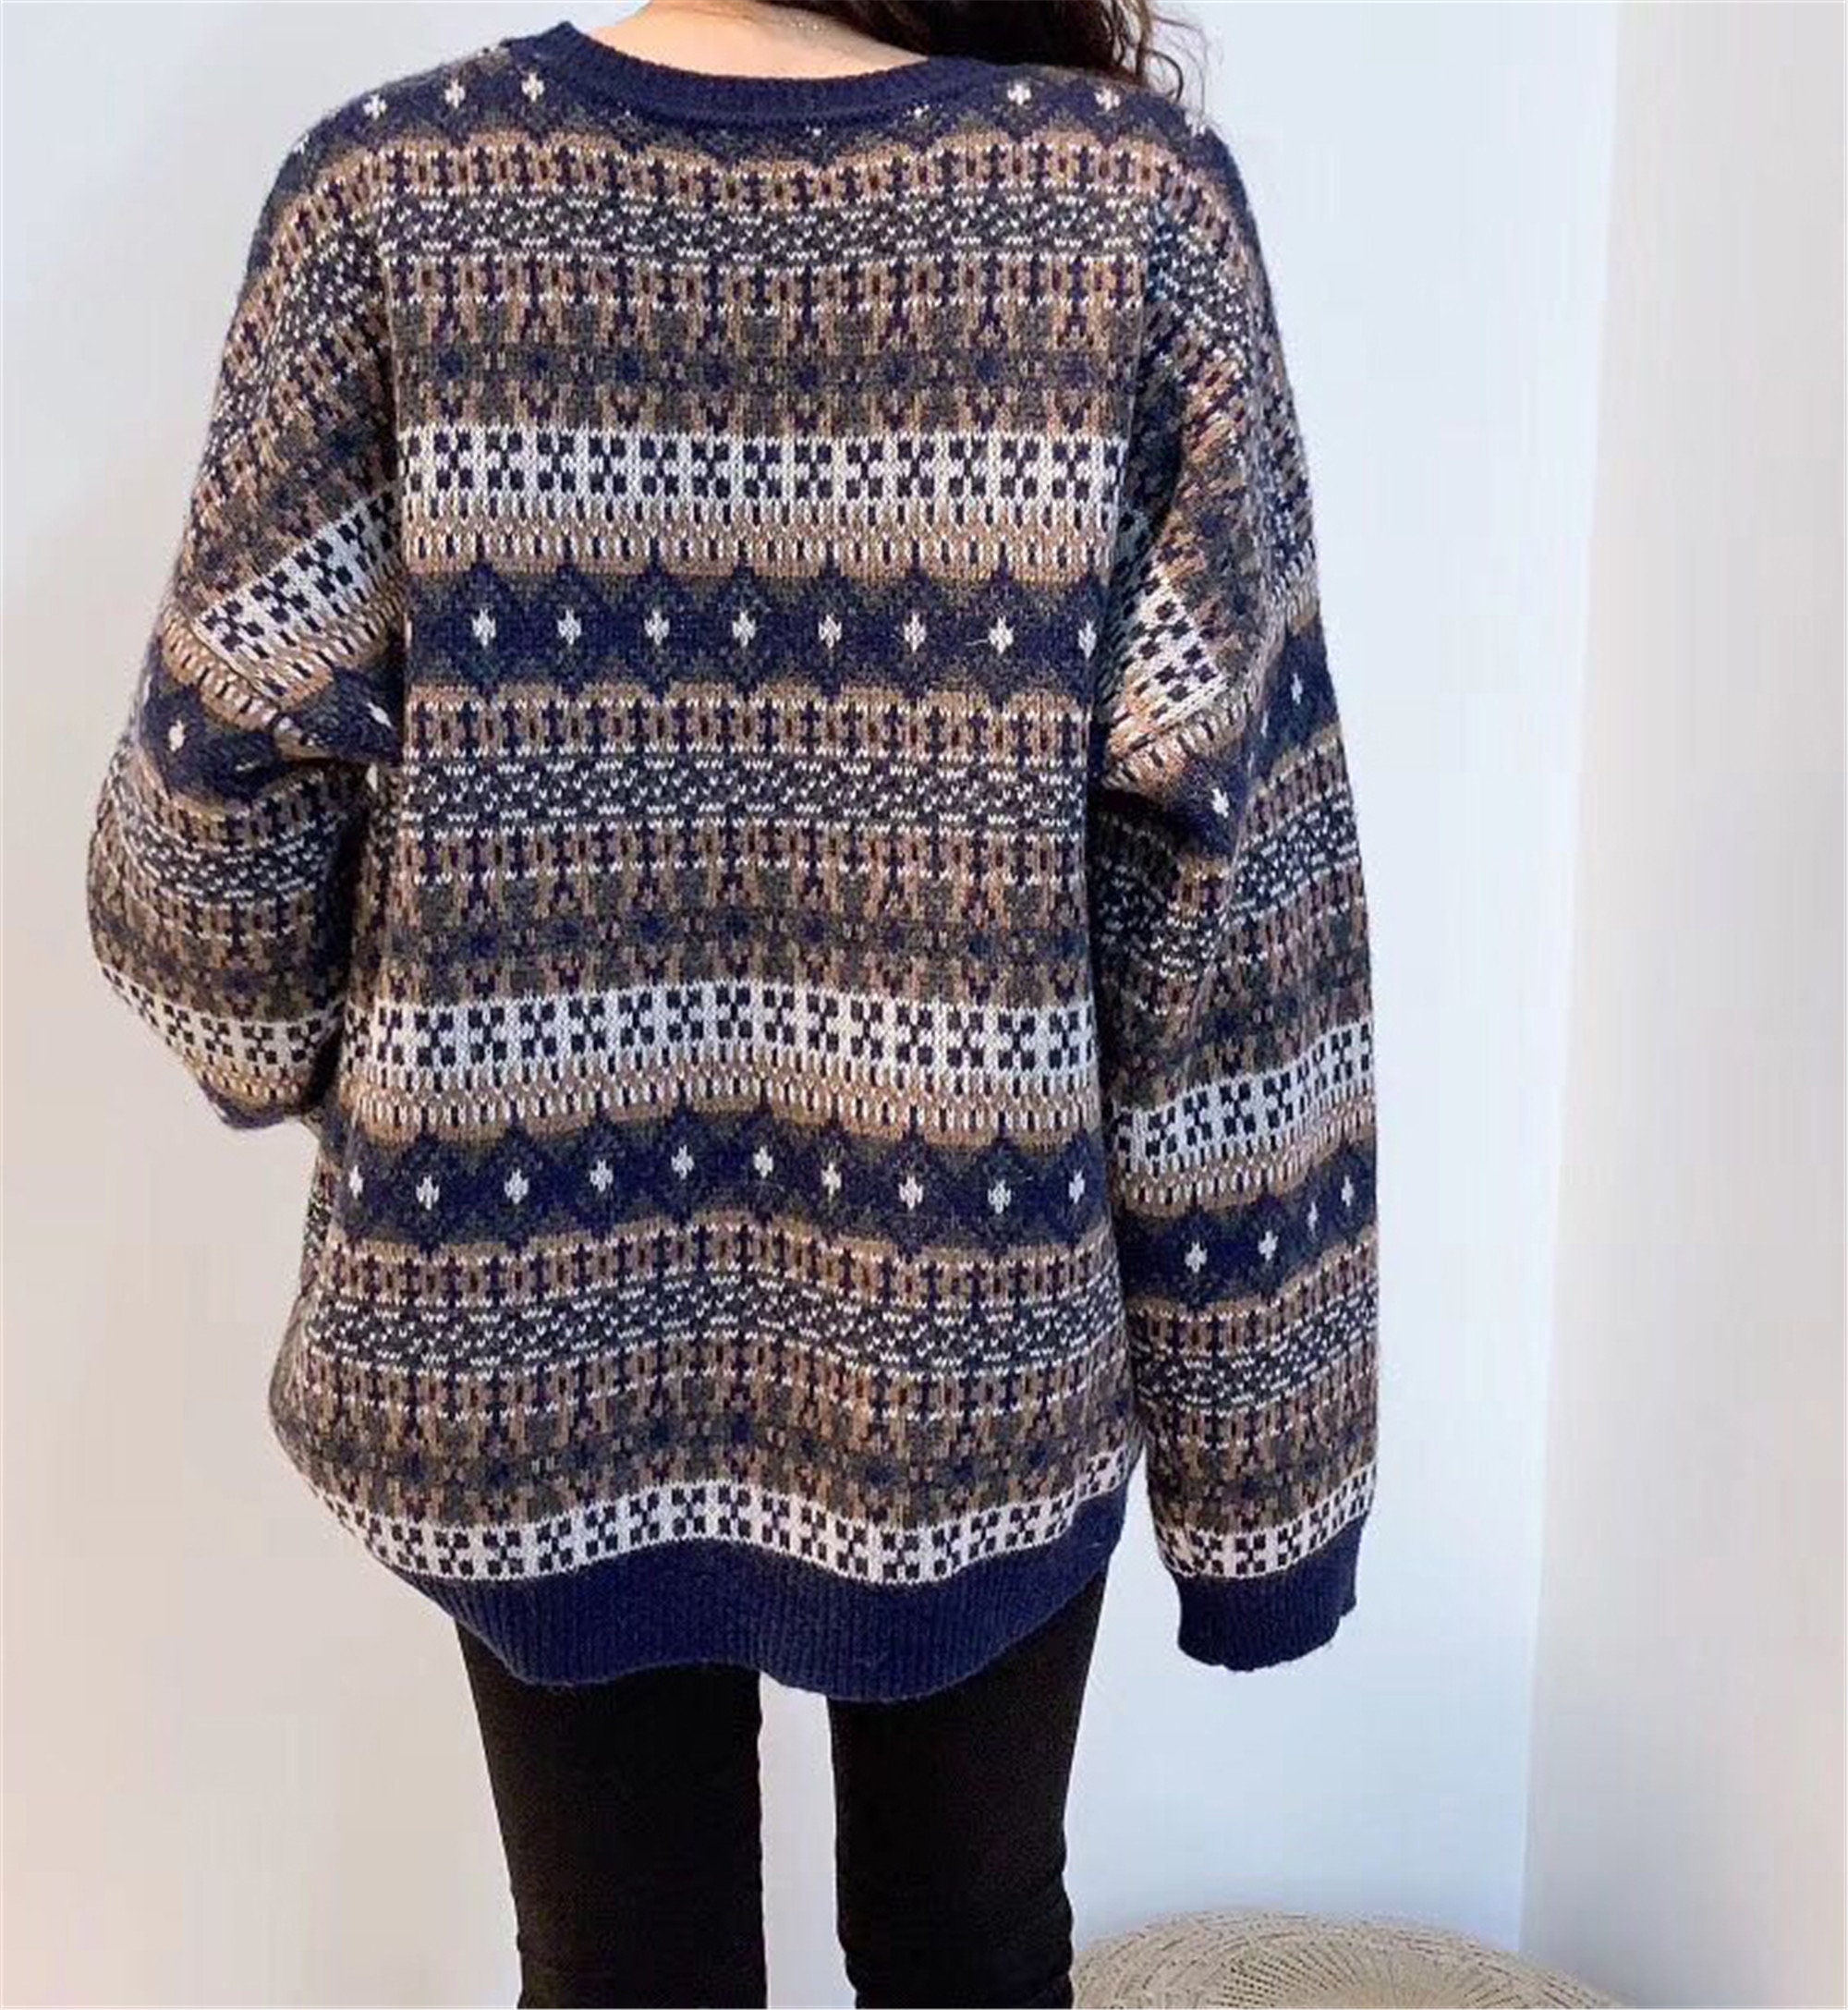 90s Retro Loose Knitted Oversized Sweater Schoolgirl Vintage - Etsy